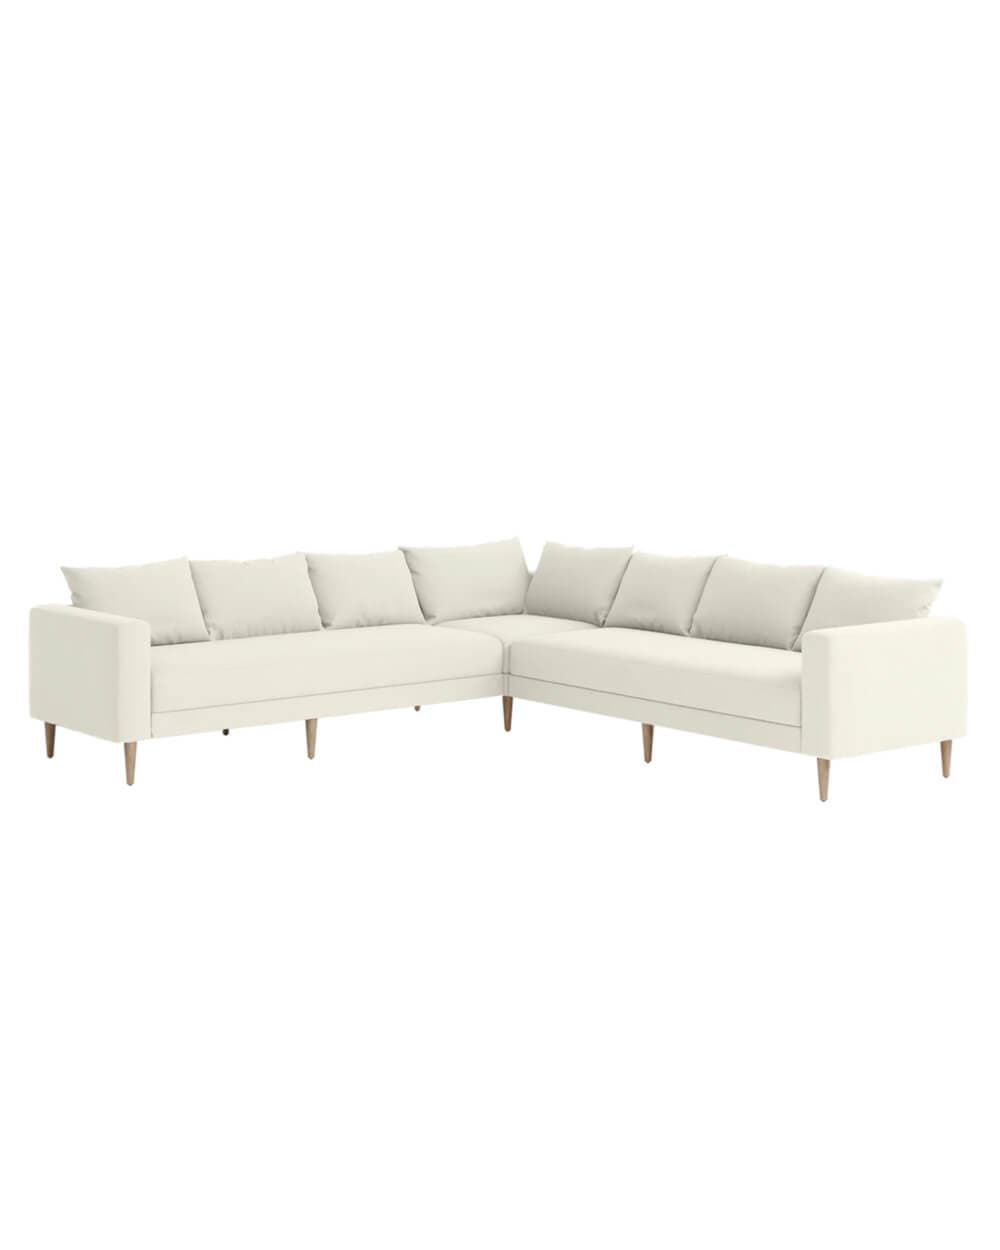 The Essential Corner Sectional (7 Seat)